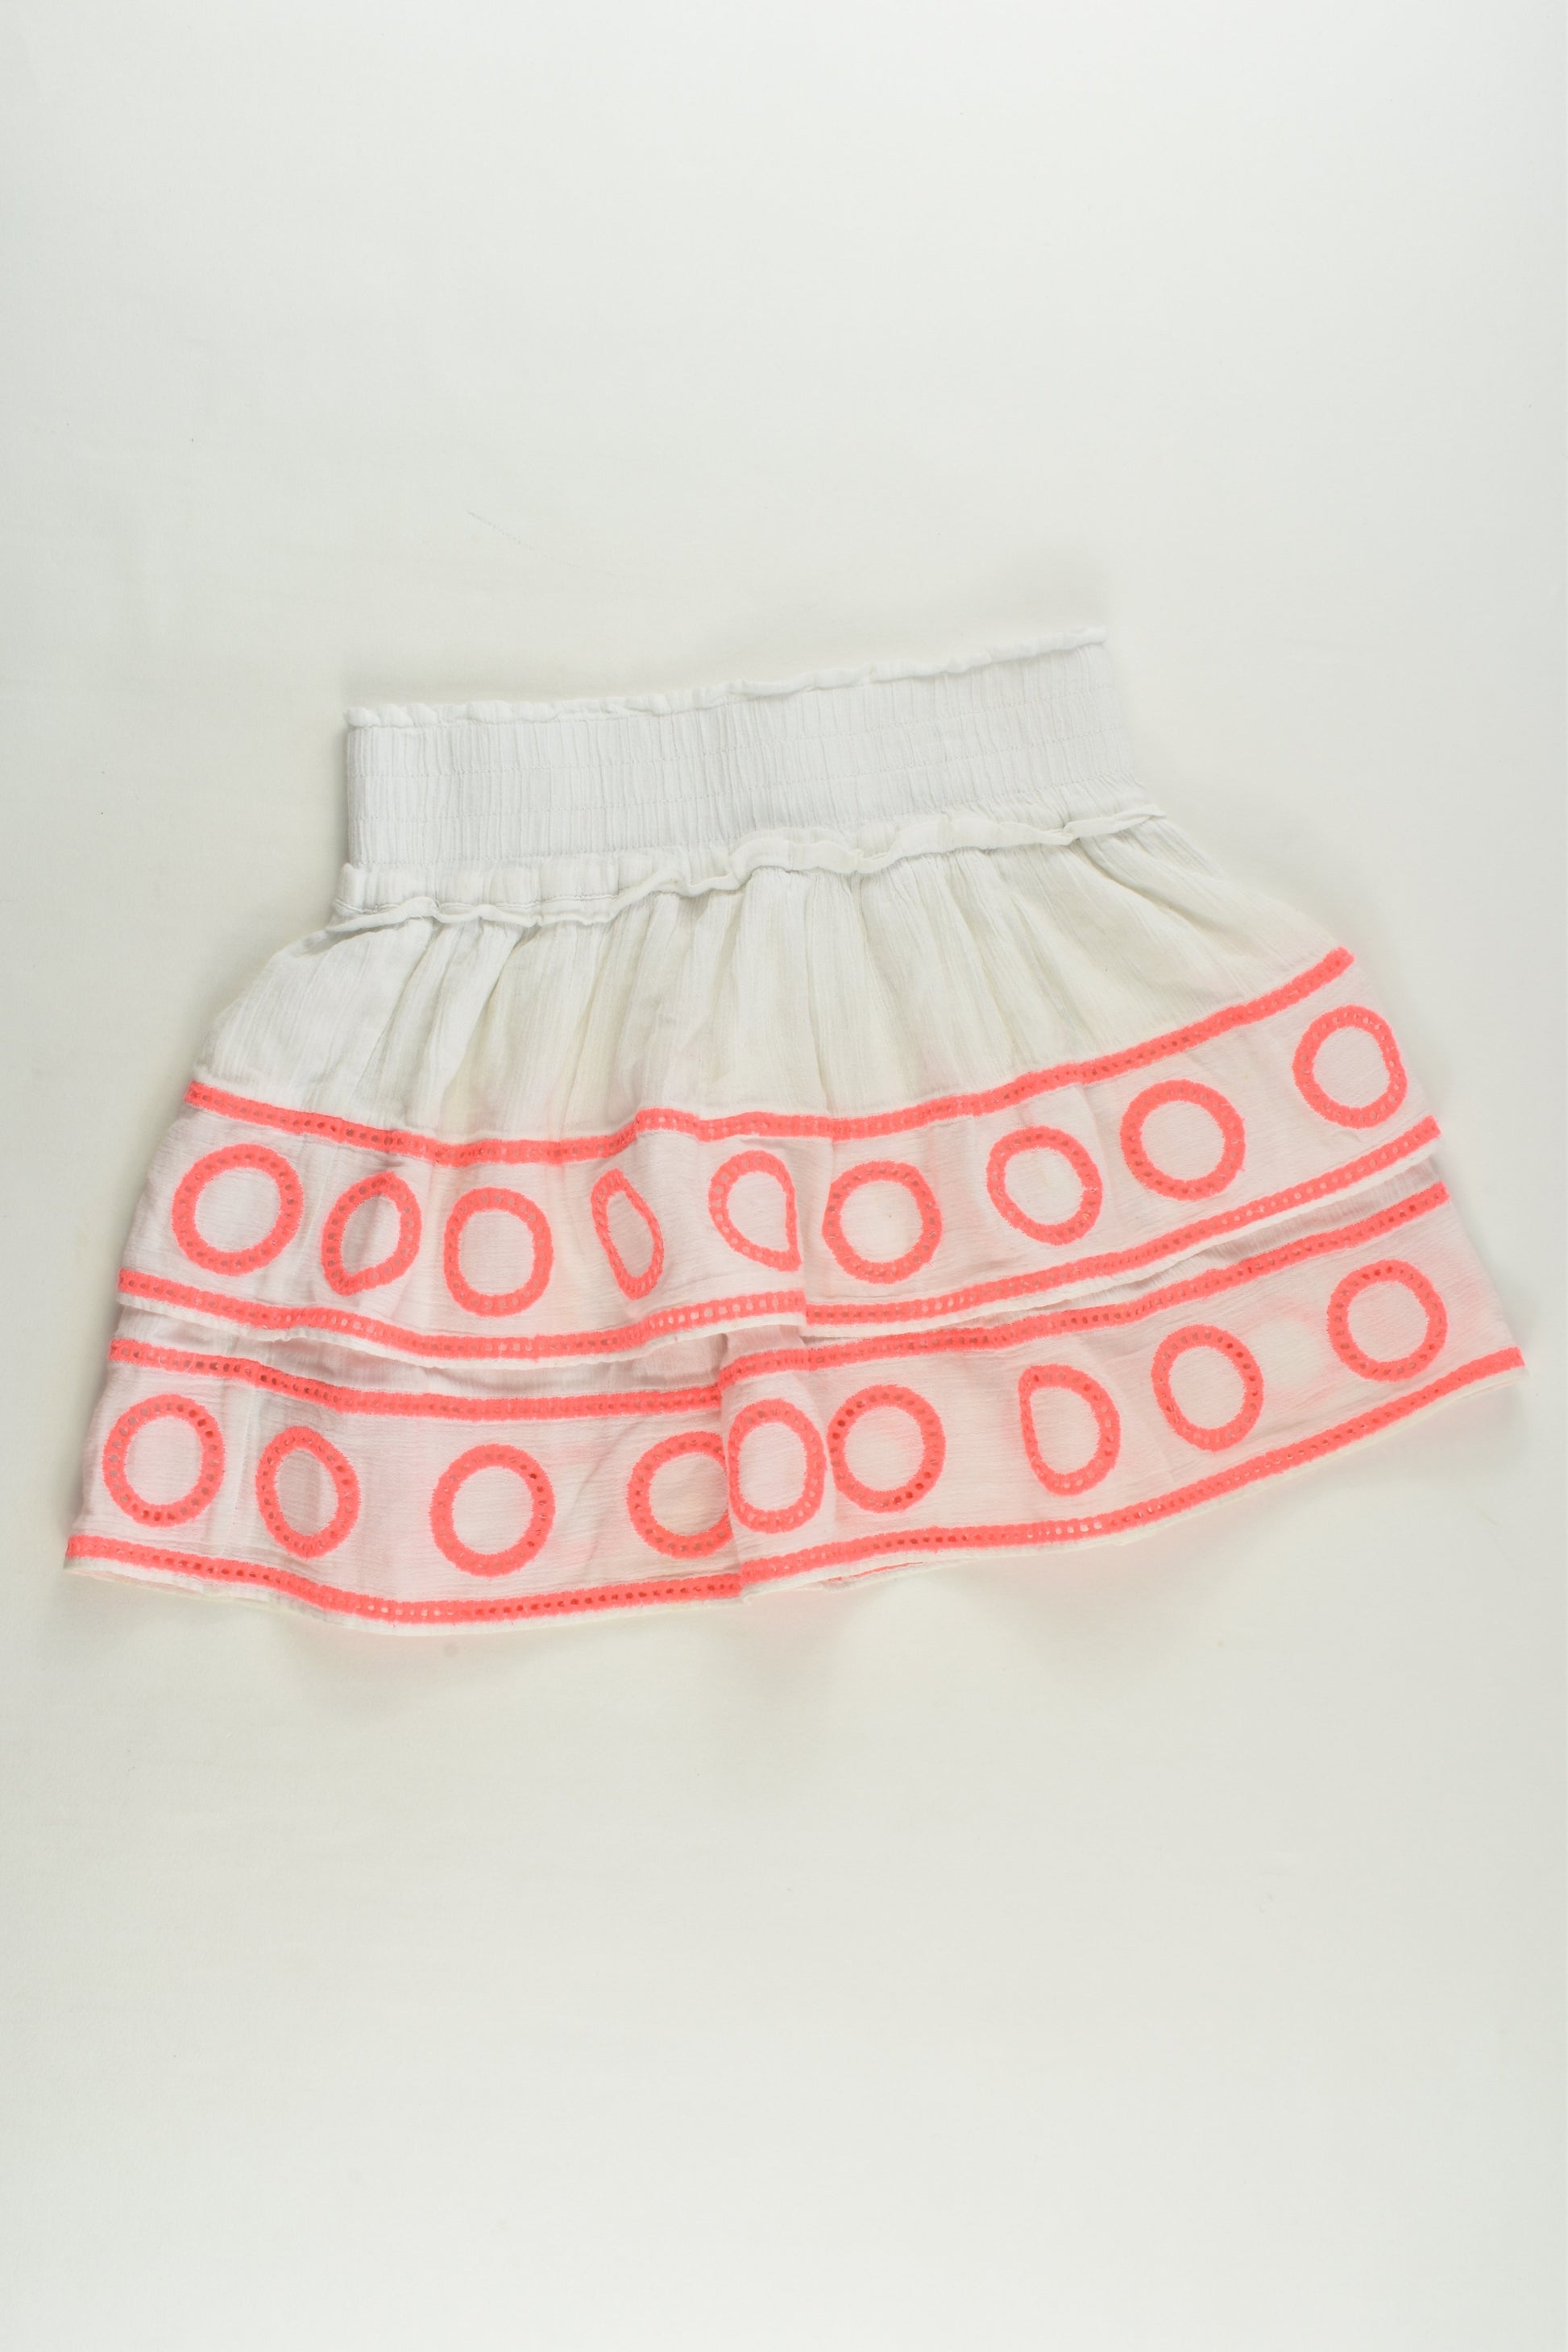 Country Road Size 5 Muslin Skirt